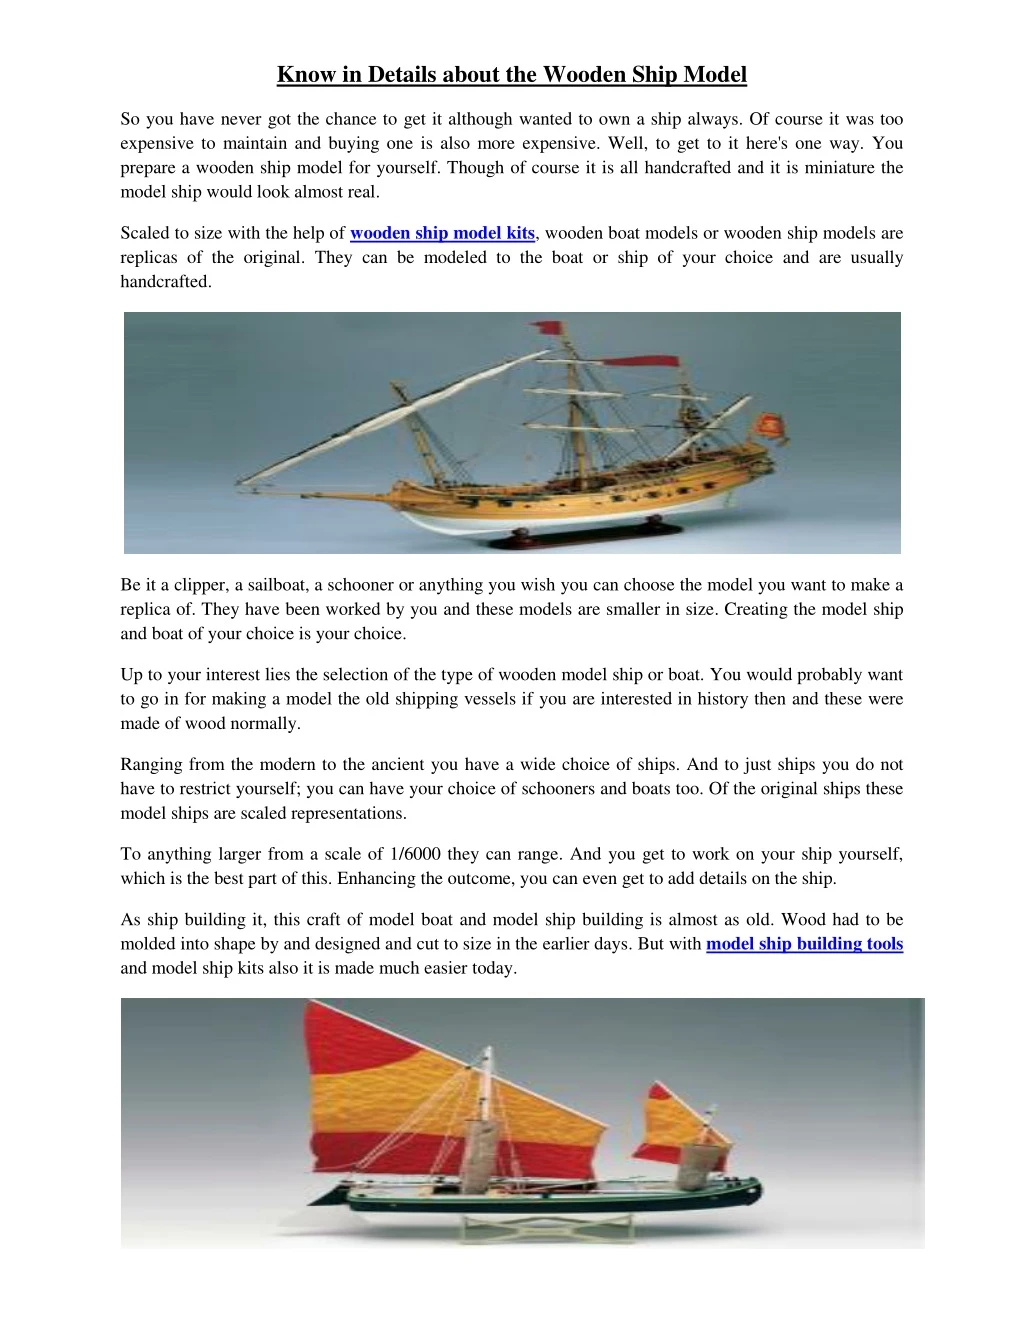 know in details about the wooden ship model